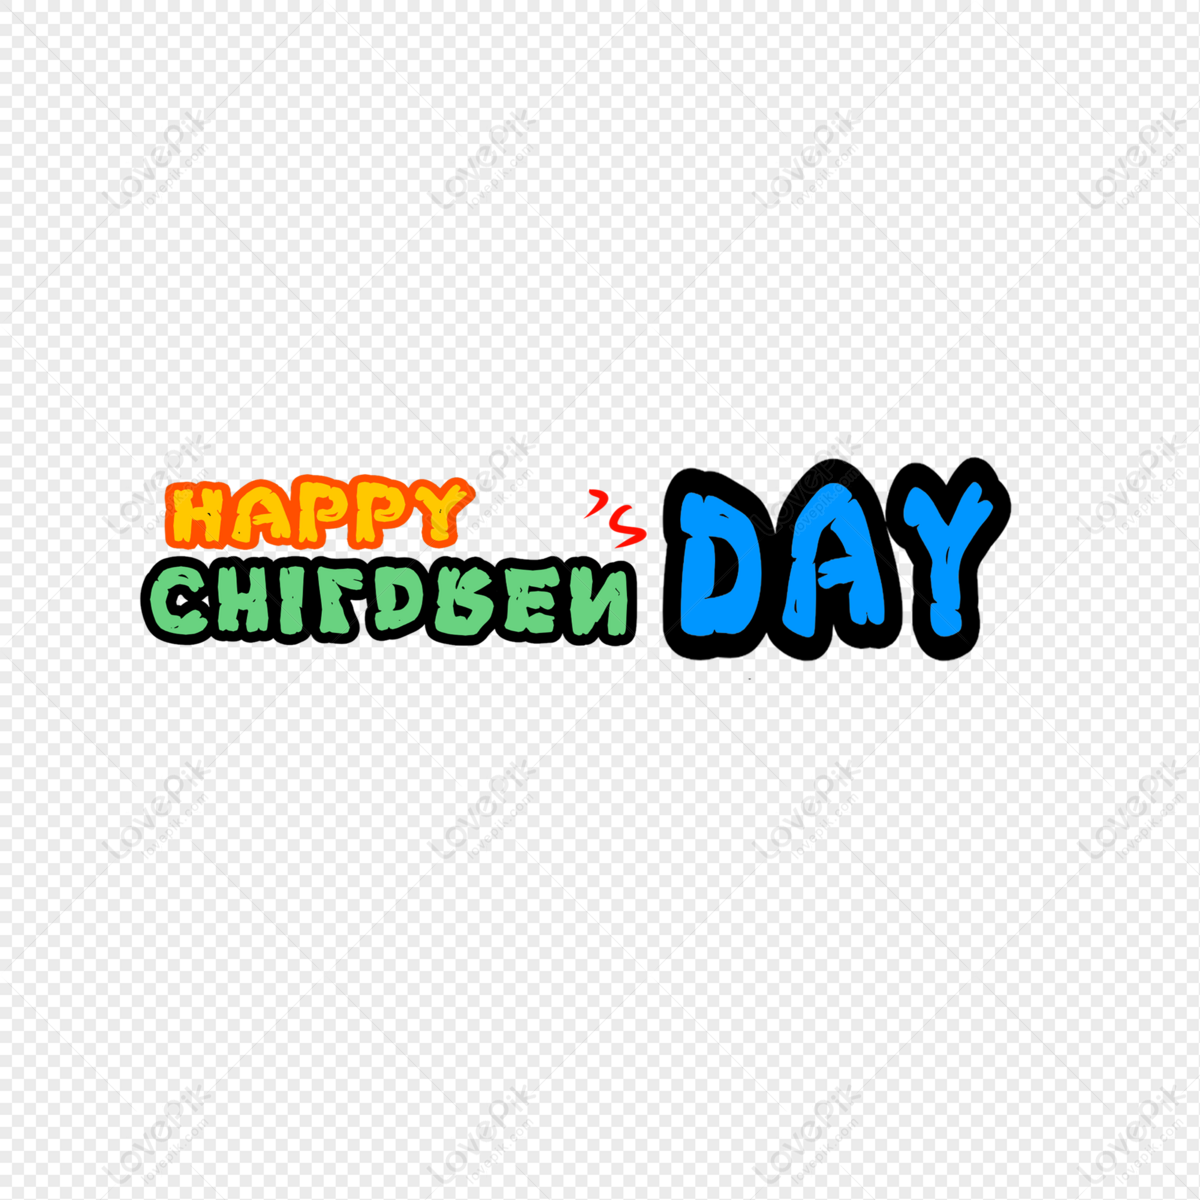 Happy Childrens Day PNG White Transparent And Clipart Image For ...